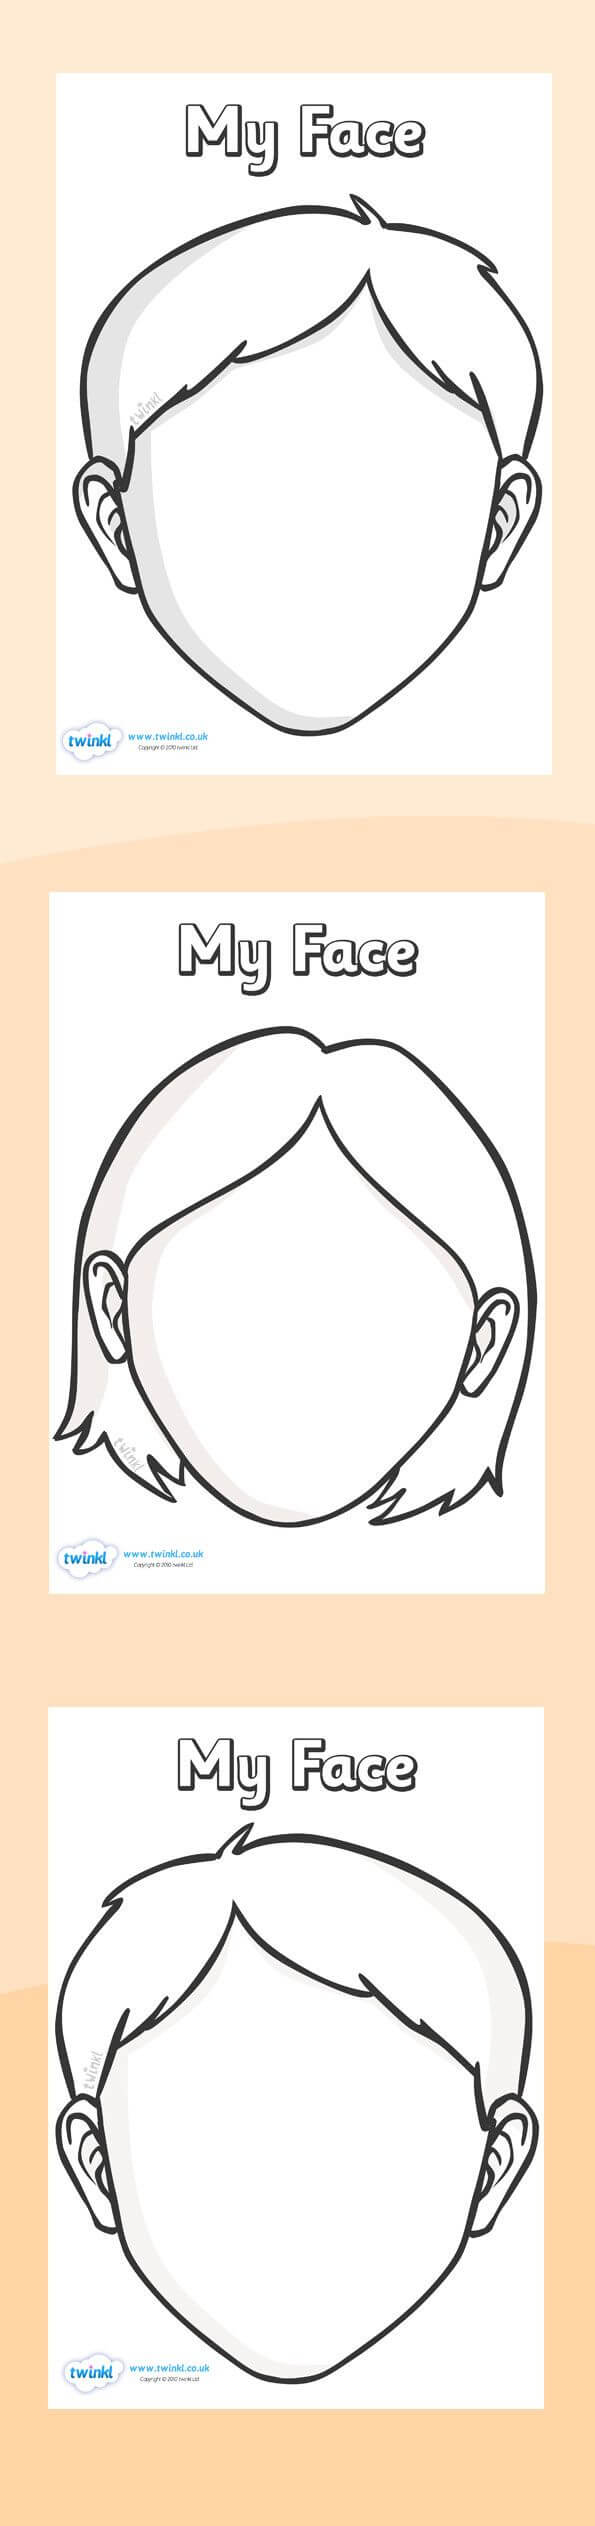 Twinkl Resources >> Blank Face Templates With Face Features Within Blank Face Template Preschool